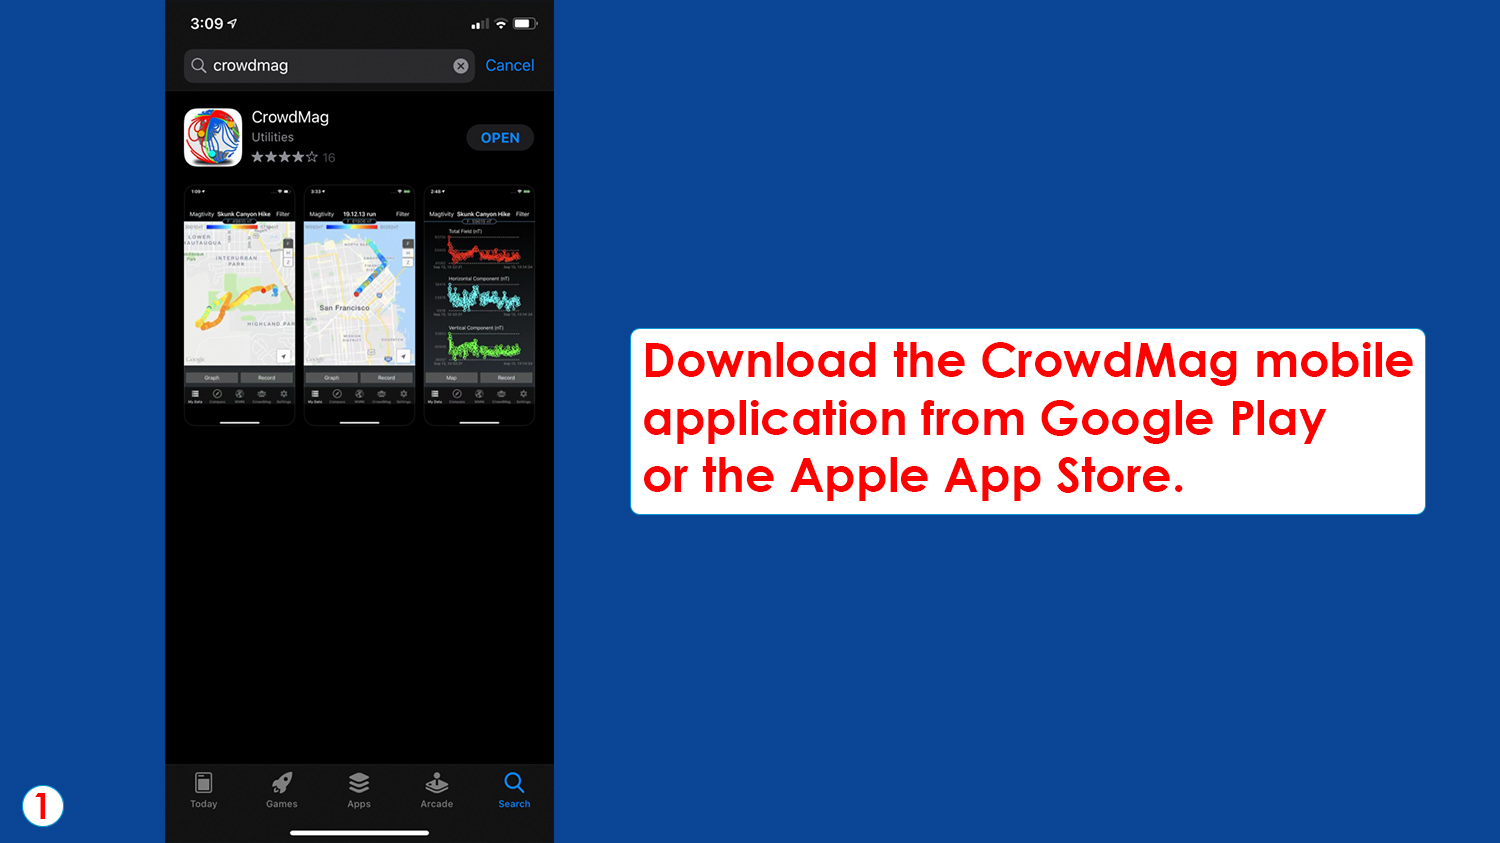 Step 1: Download the CrowdMag mobile application from Google Play or the Apple App Store.